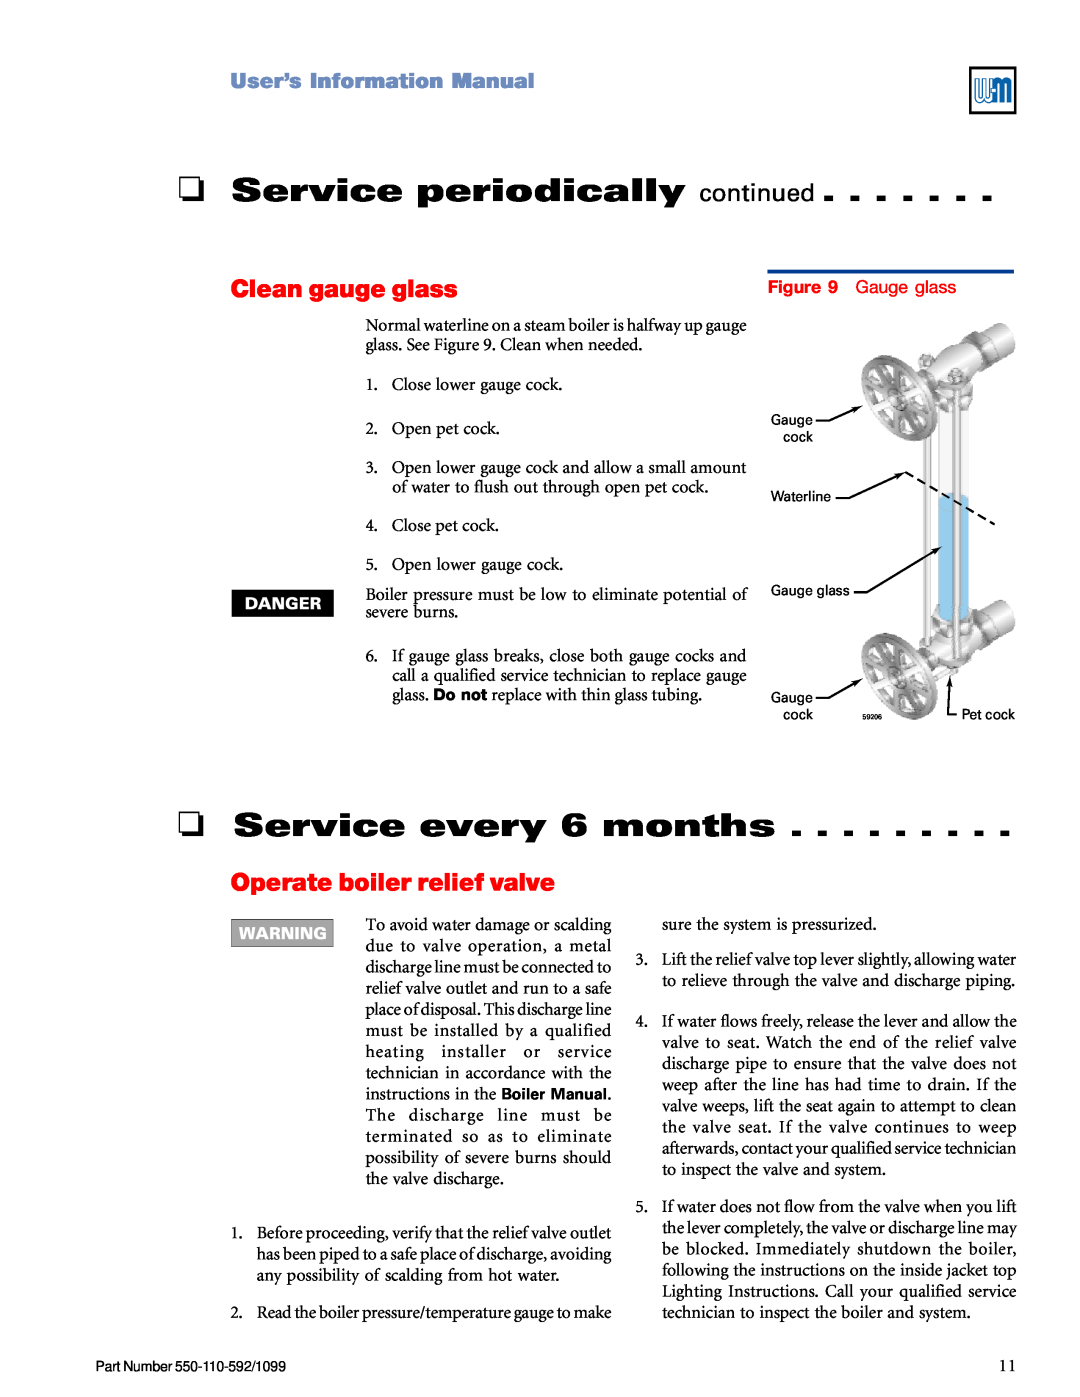 Weil-McLain CGa Service periodically continued, Service every 6 months, Clean gauge glass, Operate boiler relief valve 